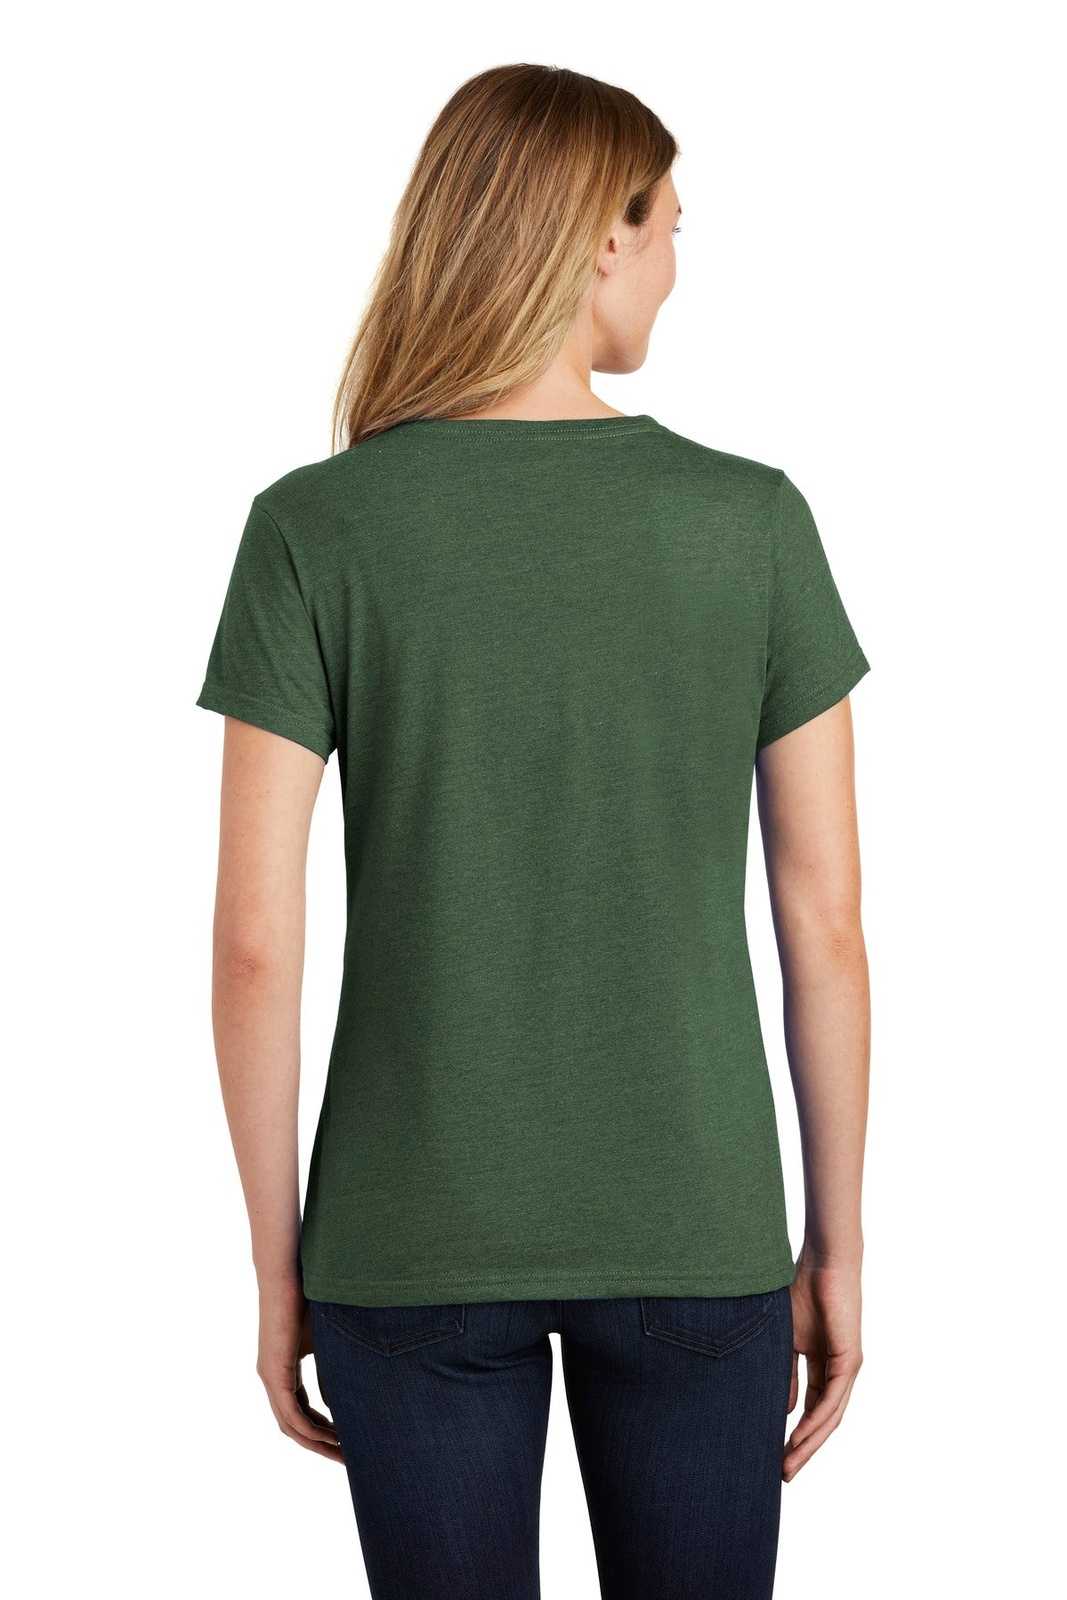 Port &amp; Company LPC455V Ladies Fan Favorite Blend V-Neck Tee - Forest Green Heather - HIT a Double - 2